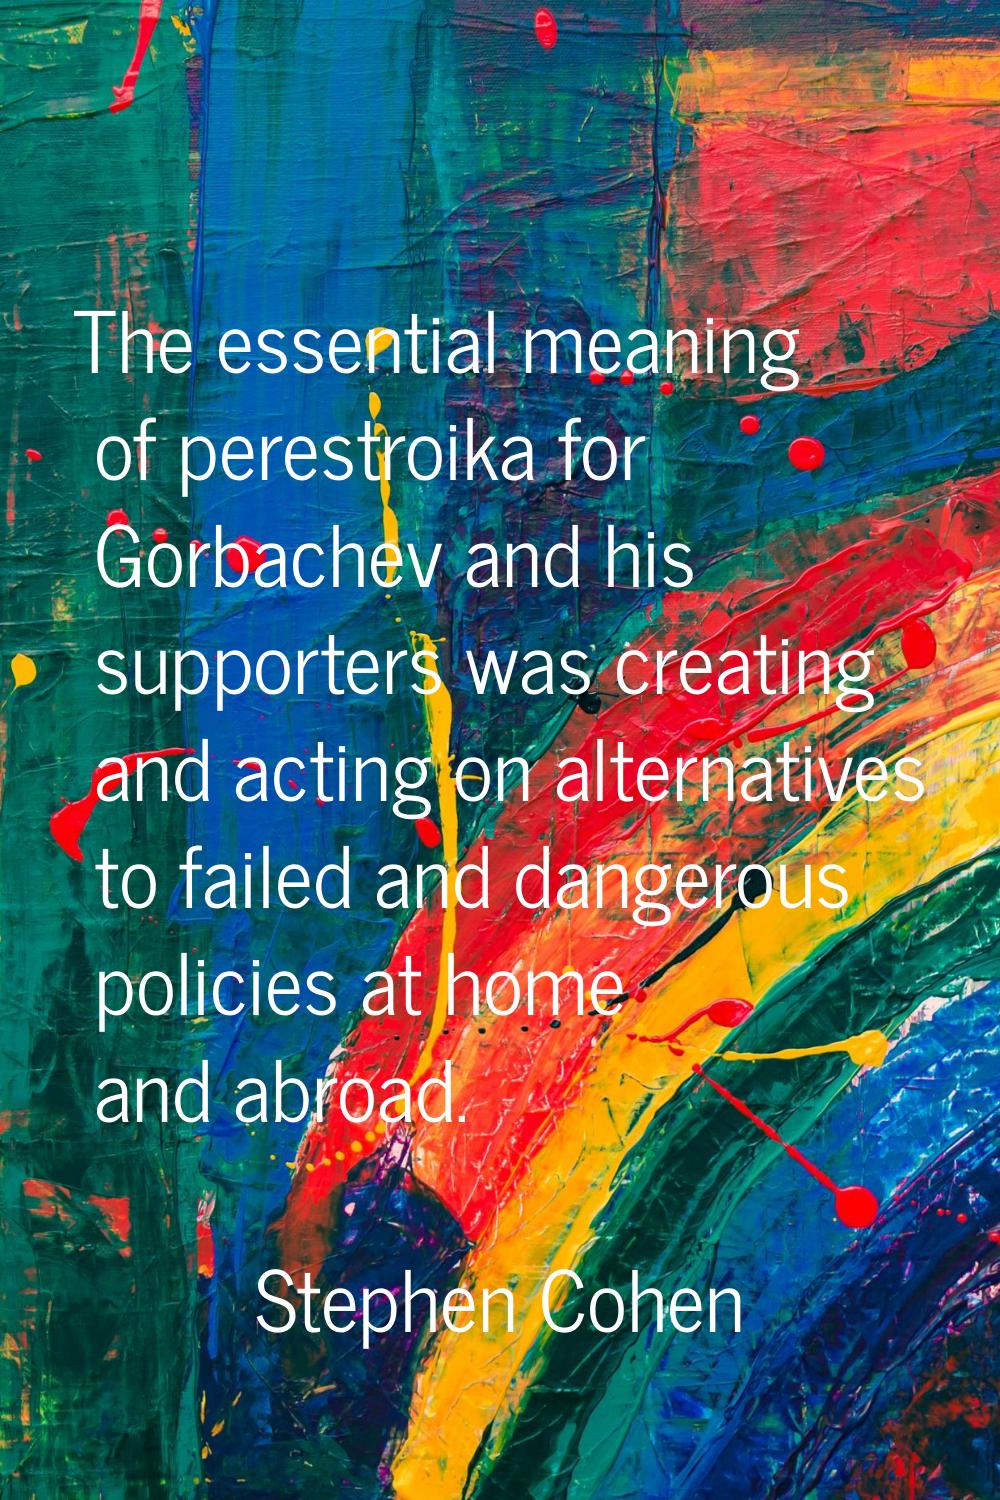 The essential meaning of perestroika for Gorbachev and his supporters was creating and acting on al